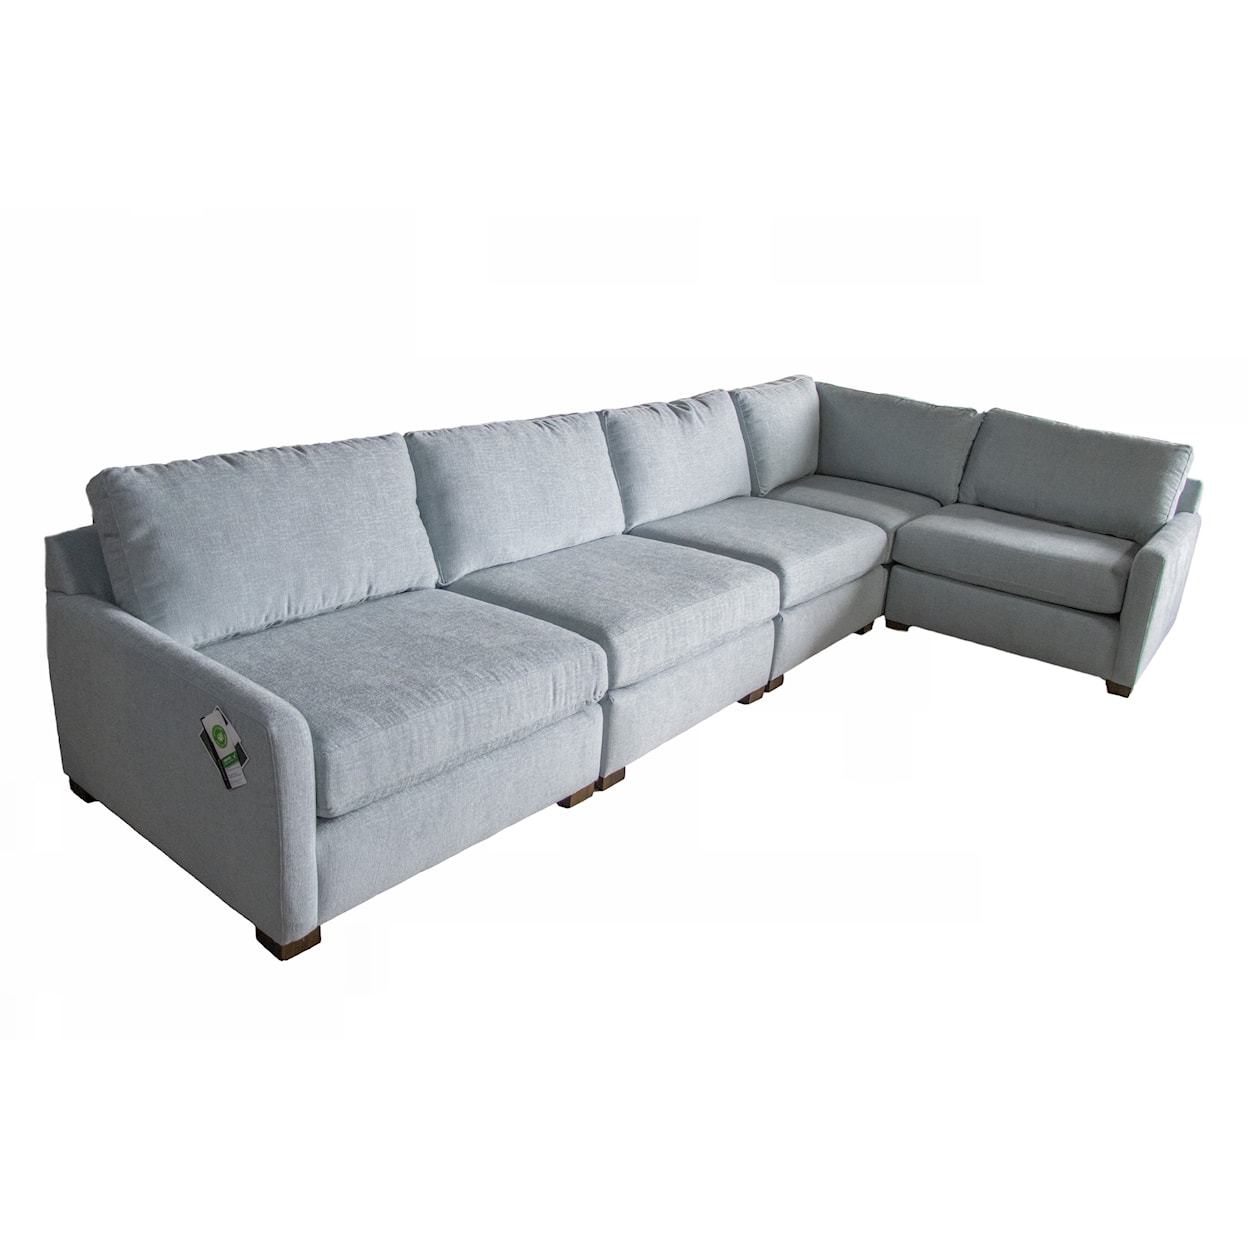 Bassett Colby Modern Style Sectional with Thin Track Arms